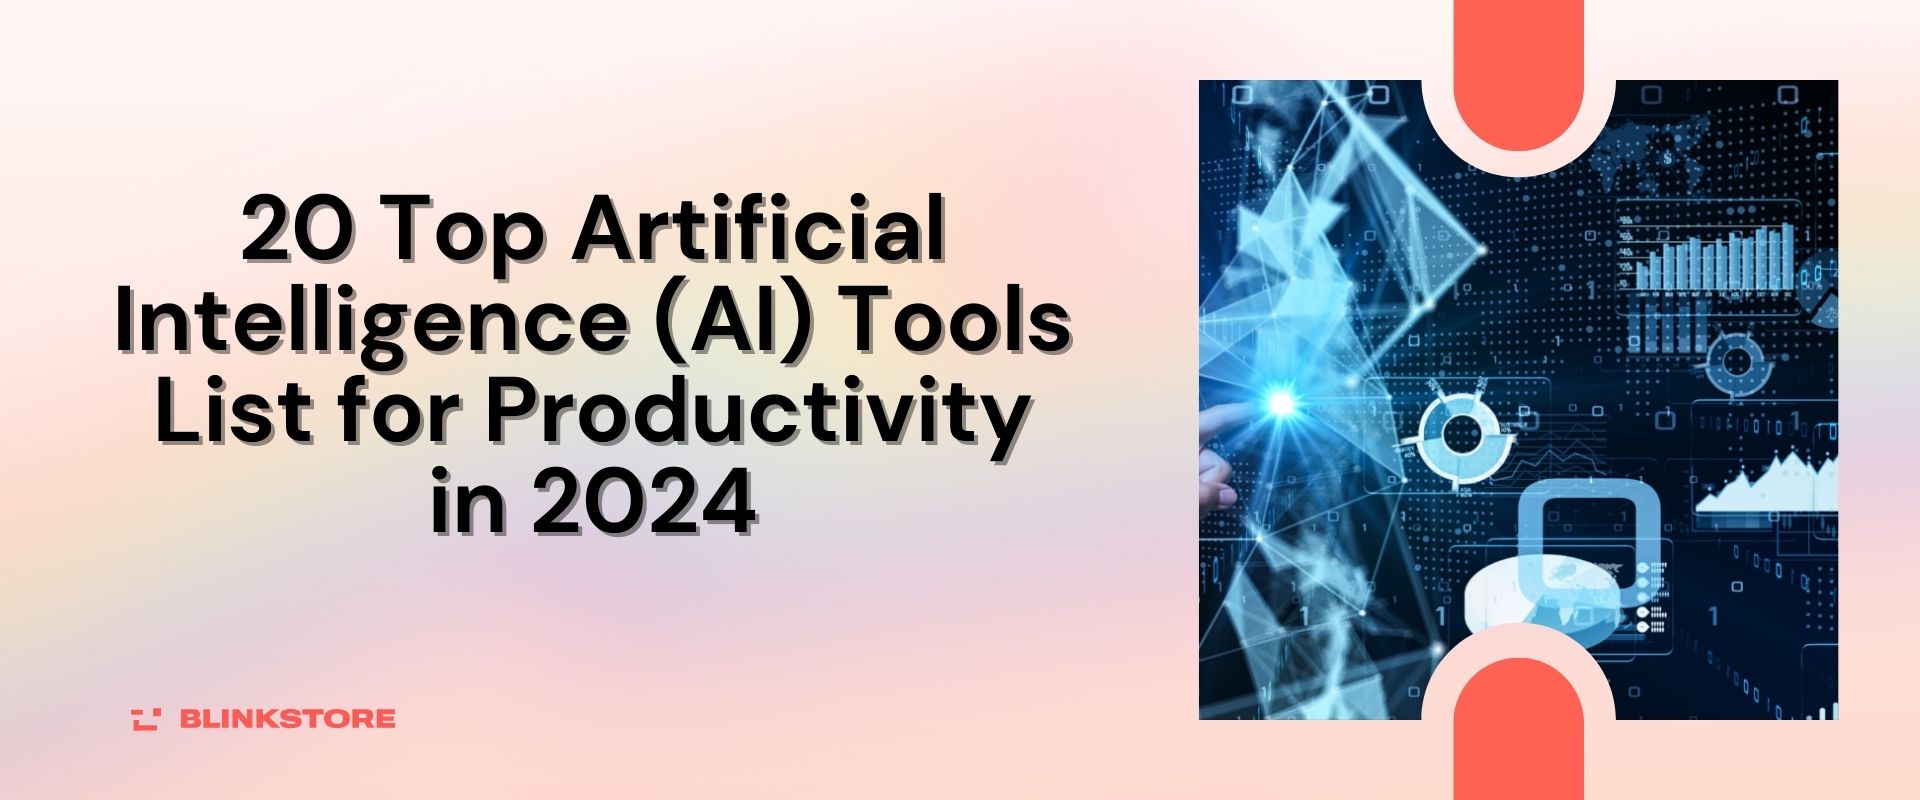 60+ Top Artificial Intelligence (AI) Tools List for Productivity in 2024